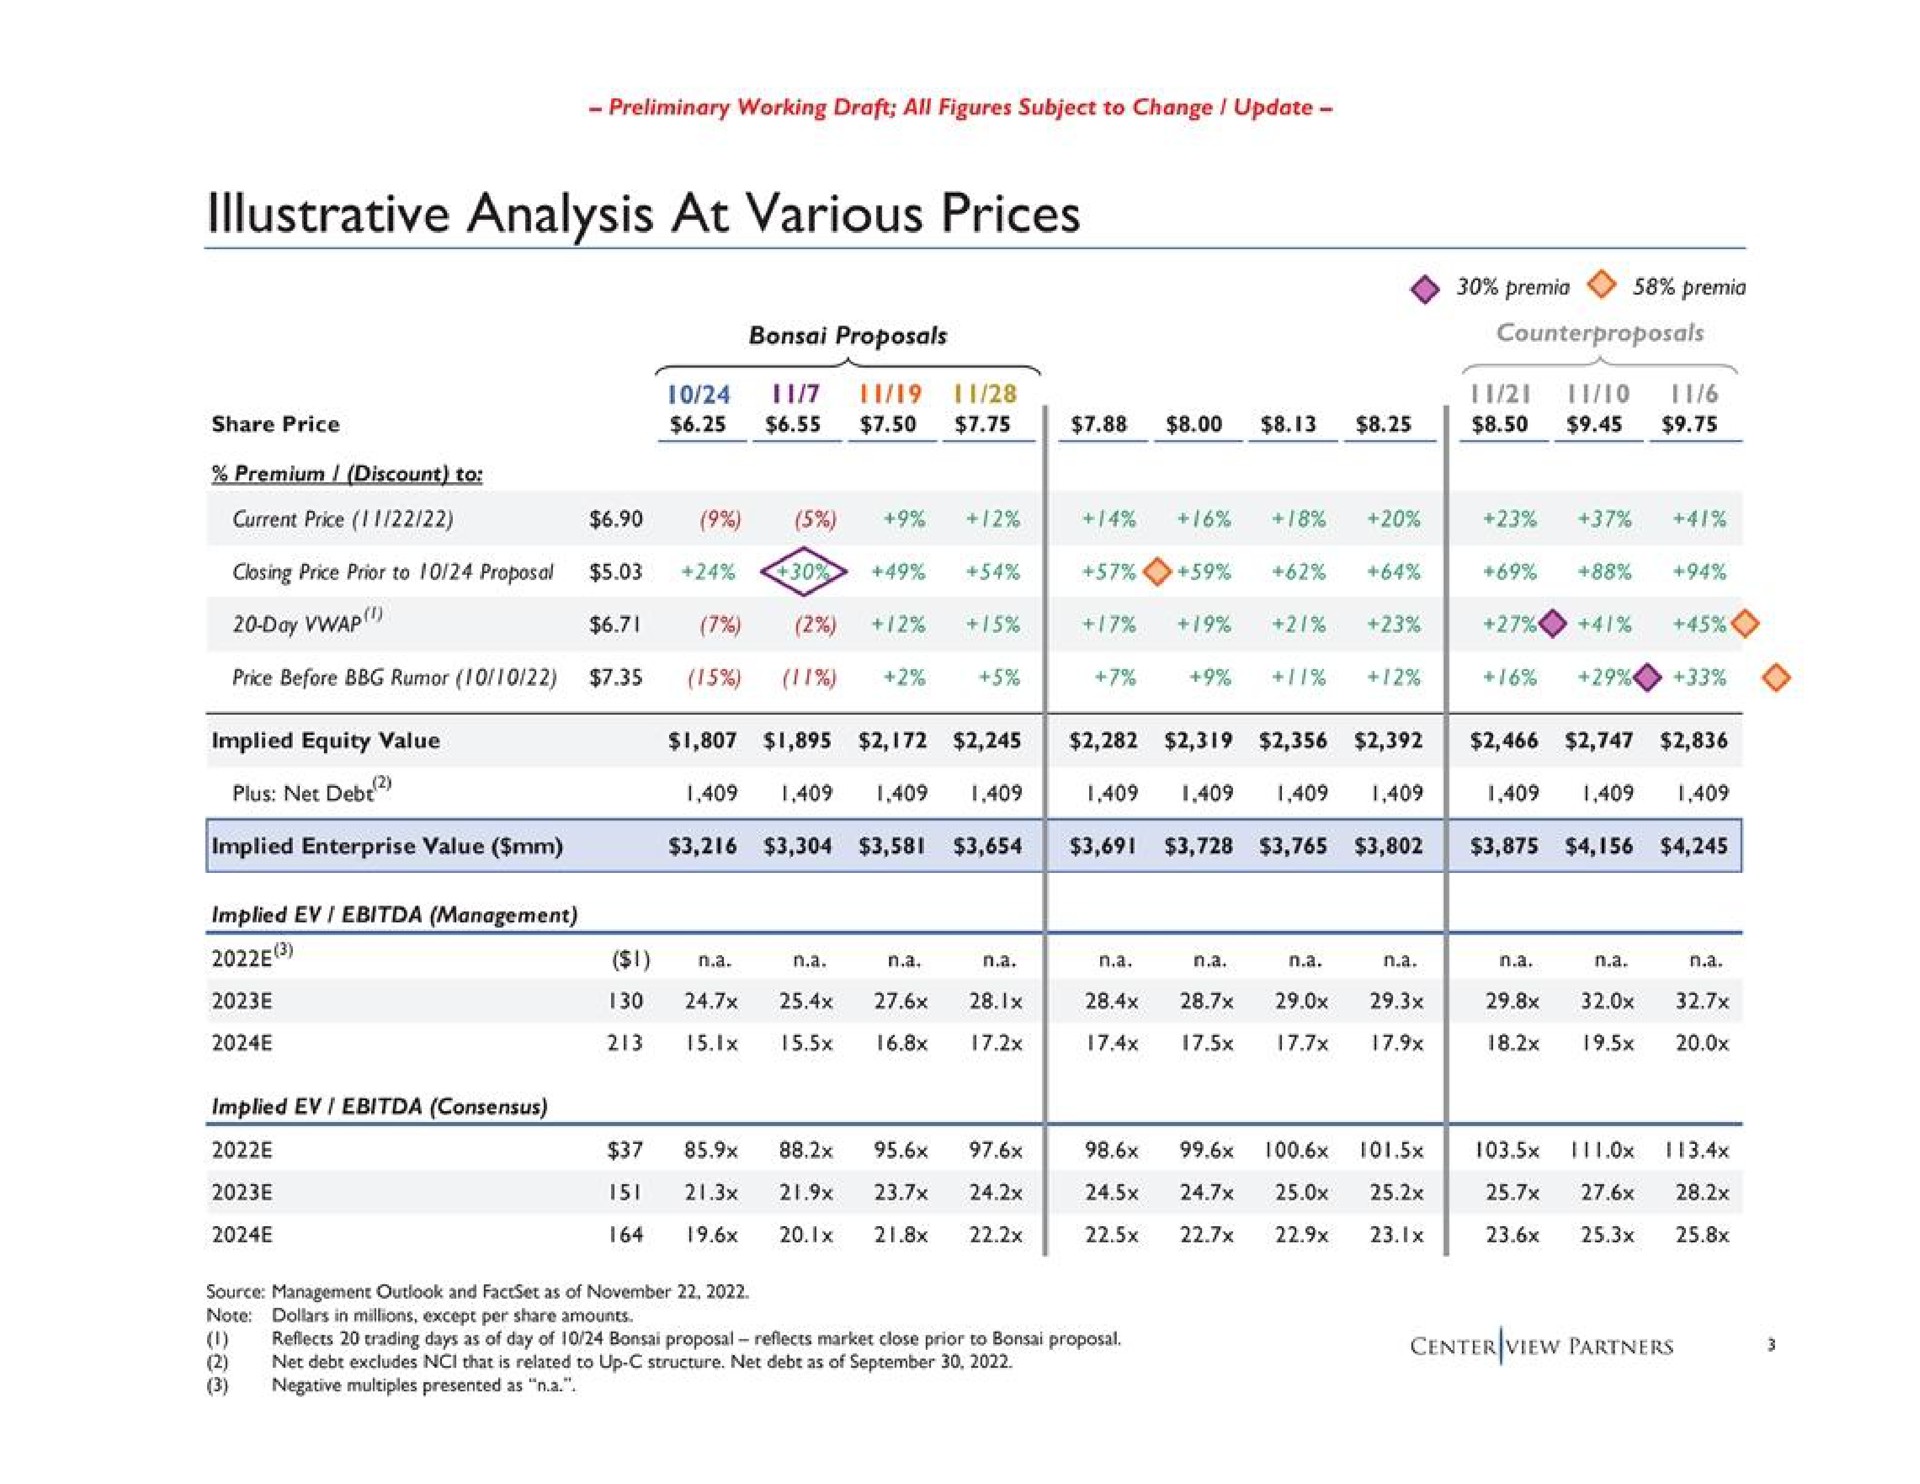 illustrative analysis at various prices | Centerview Partners